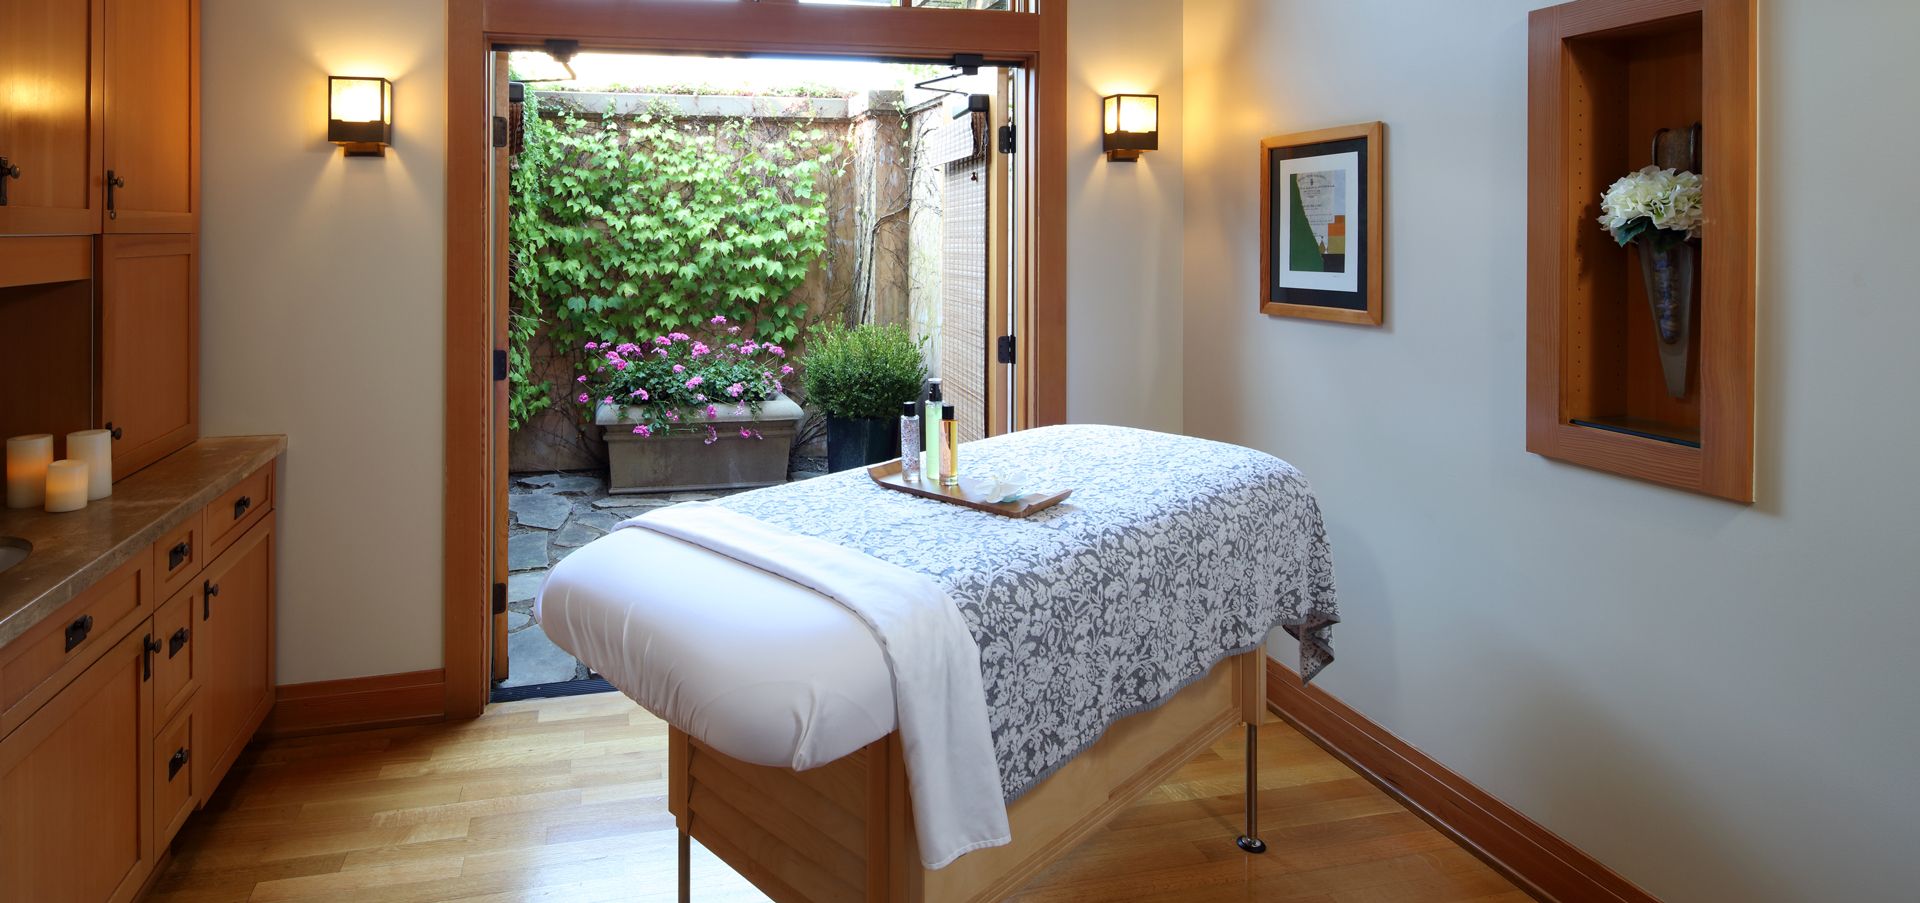 hilton avisford park spa reviews on webmd and submit